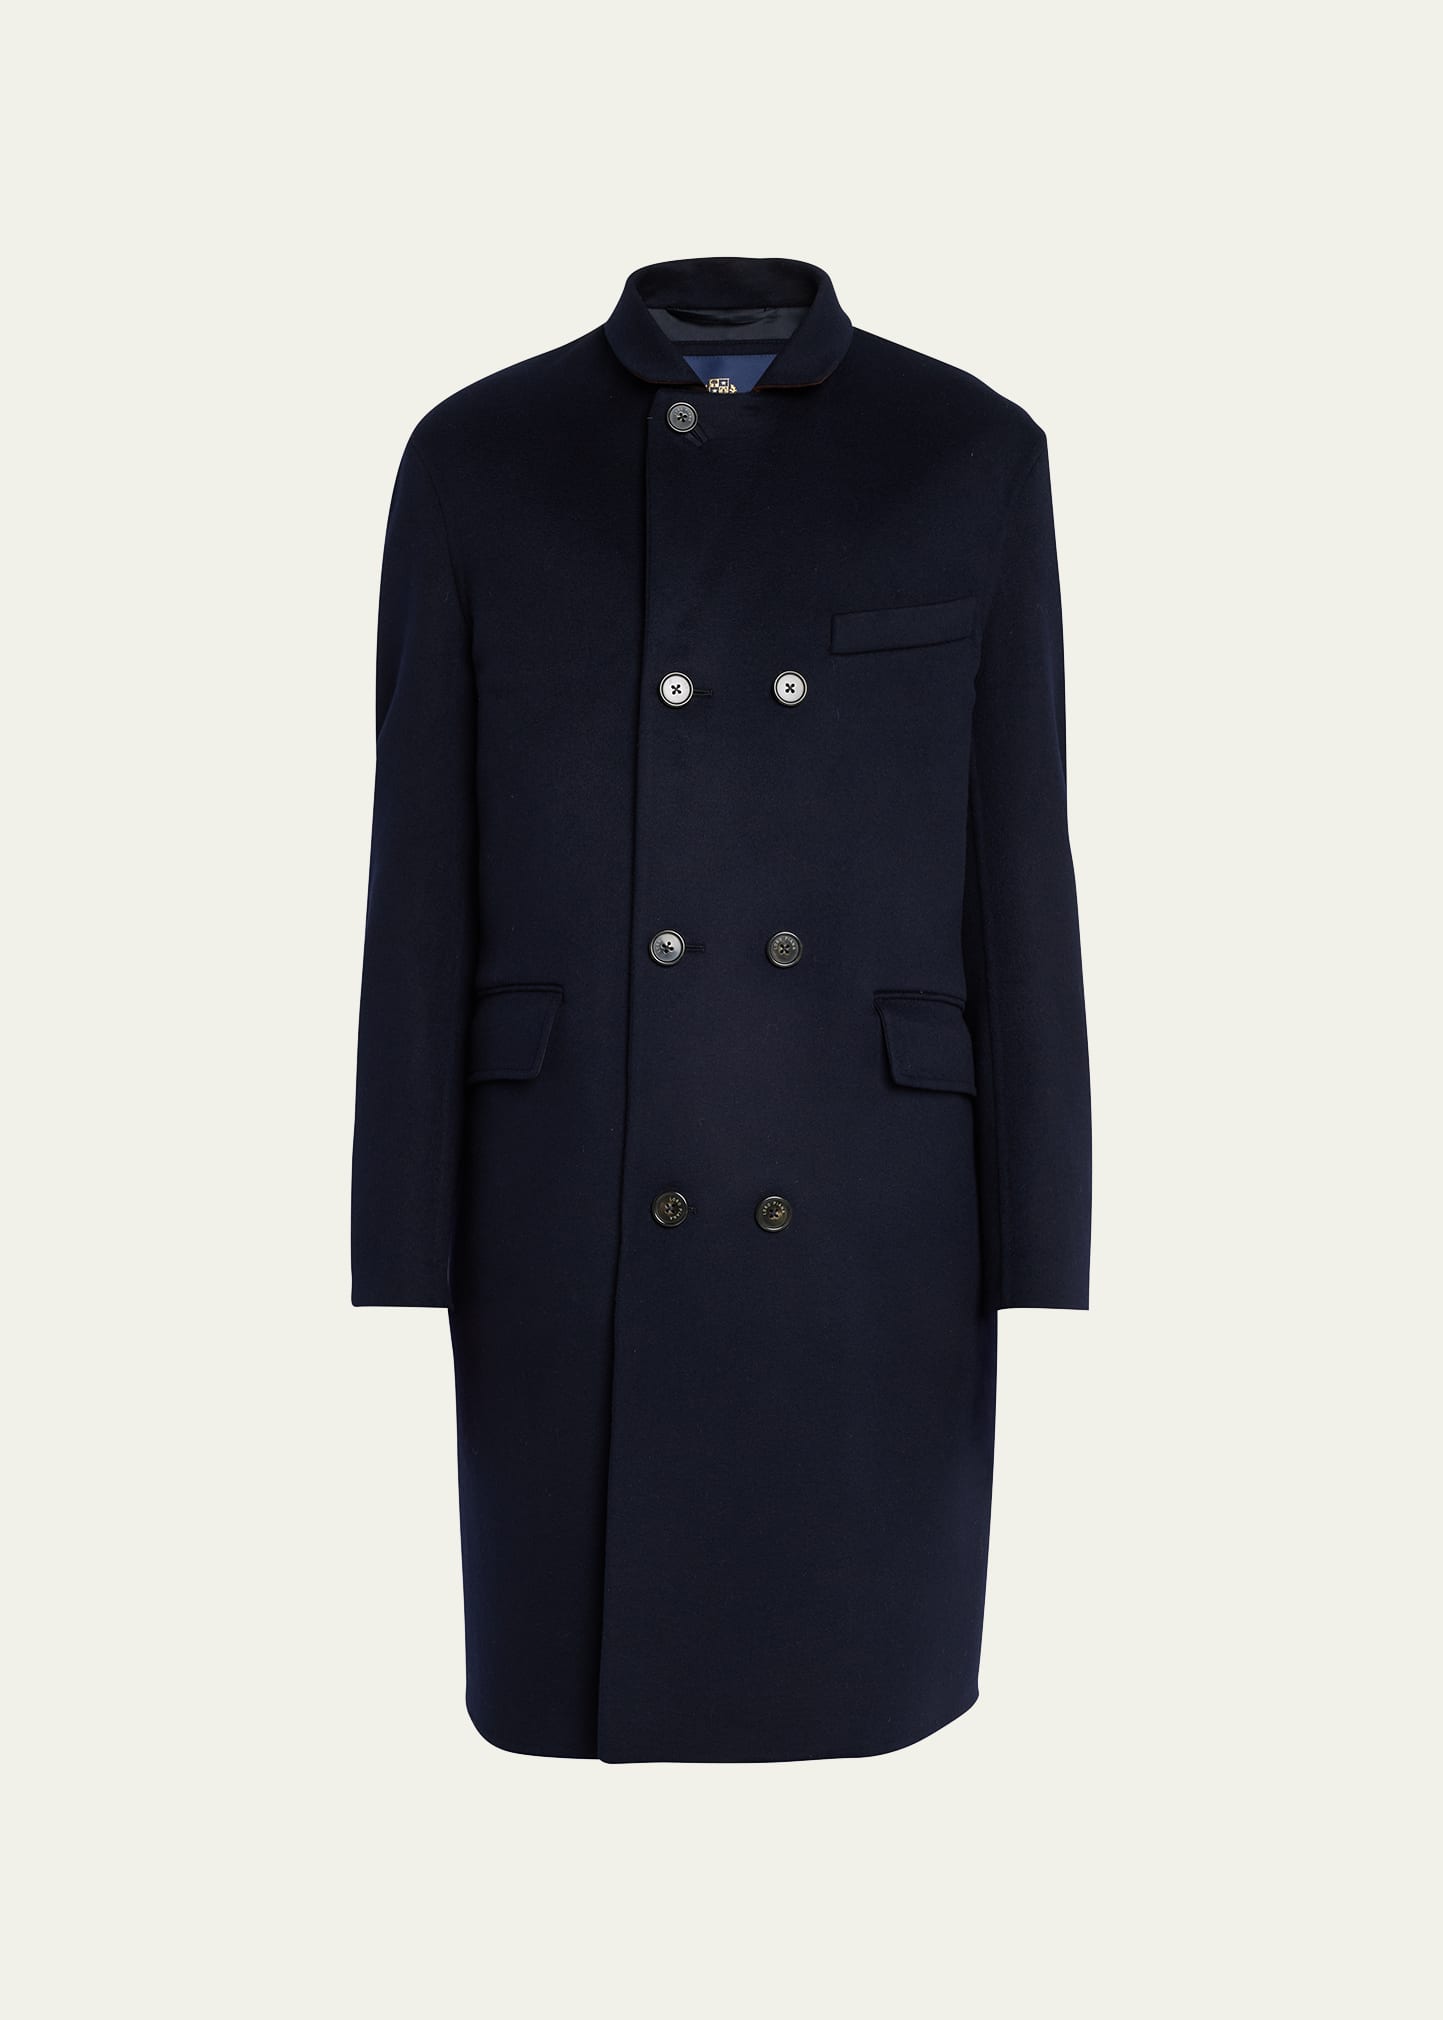 Men's Cashmere Double Breasted Overcoat